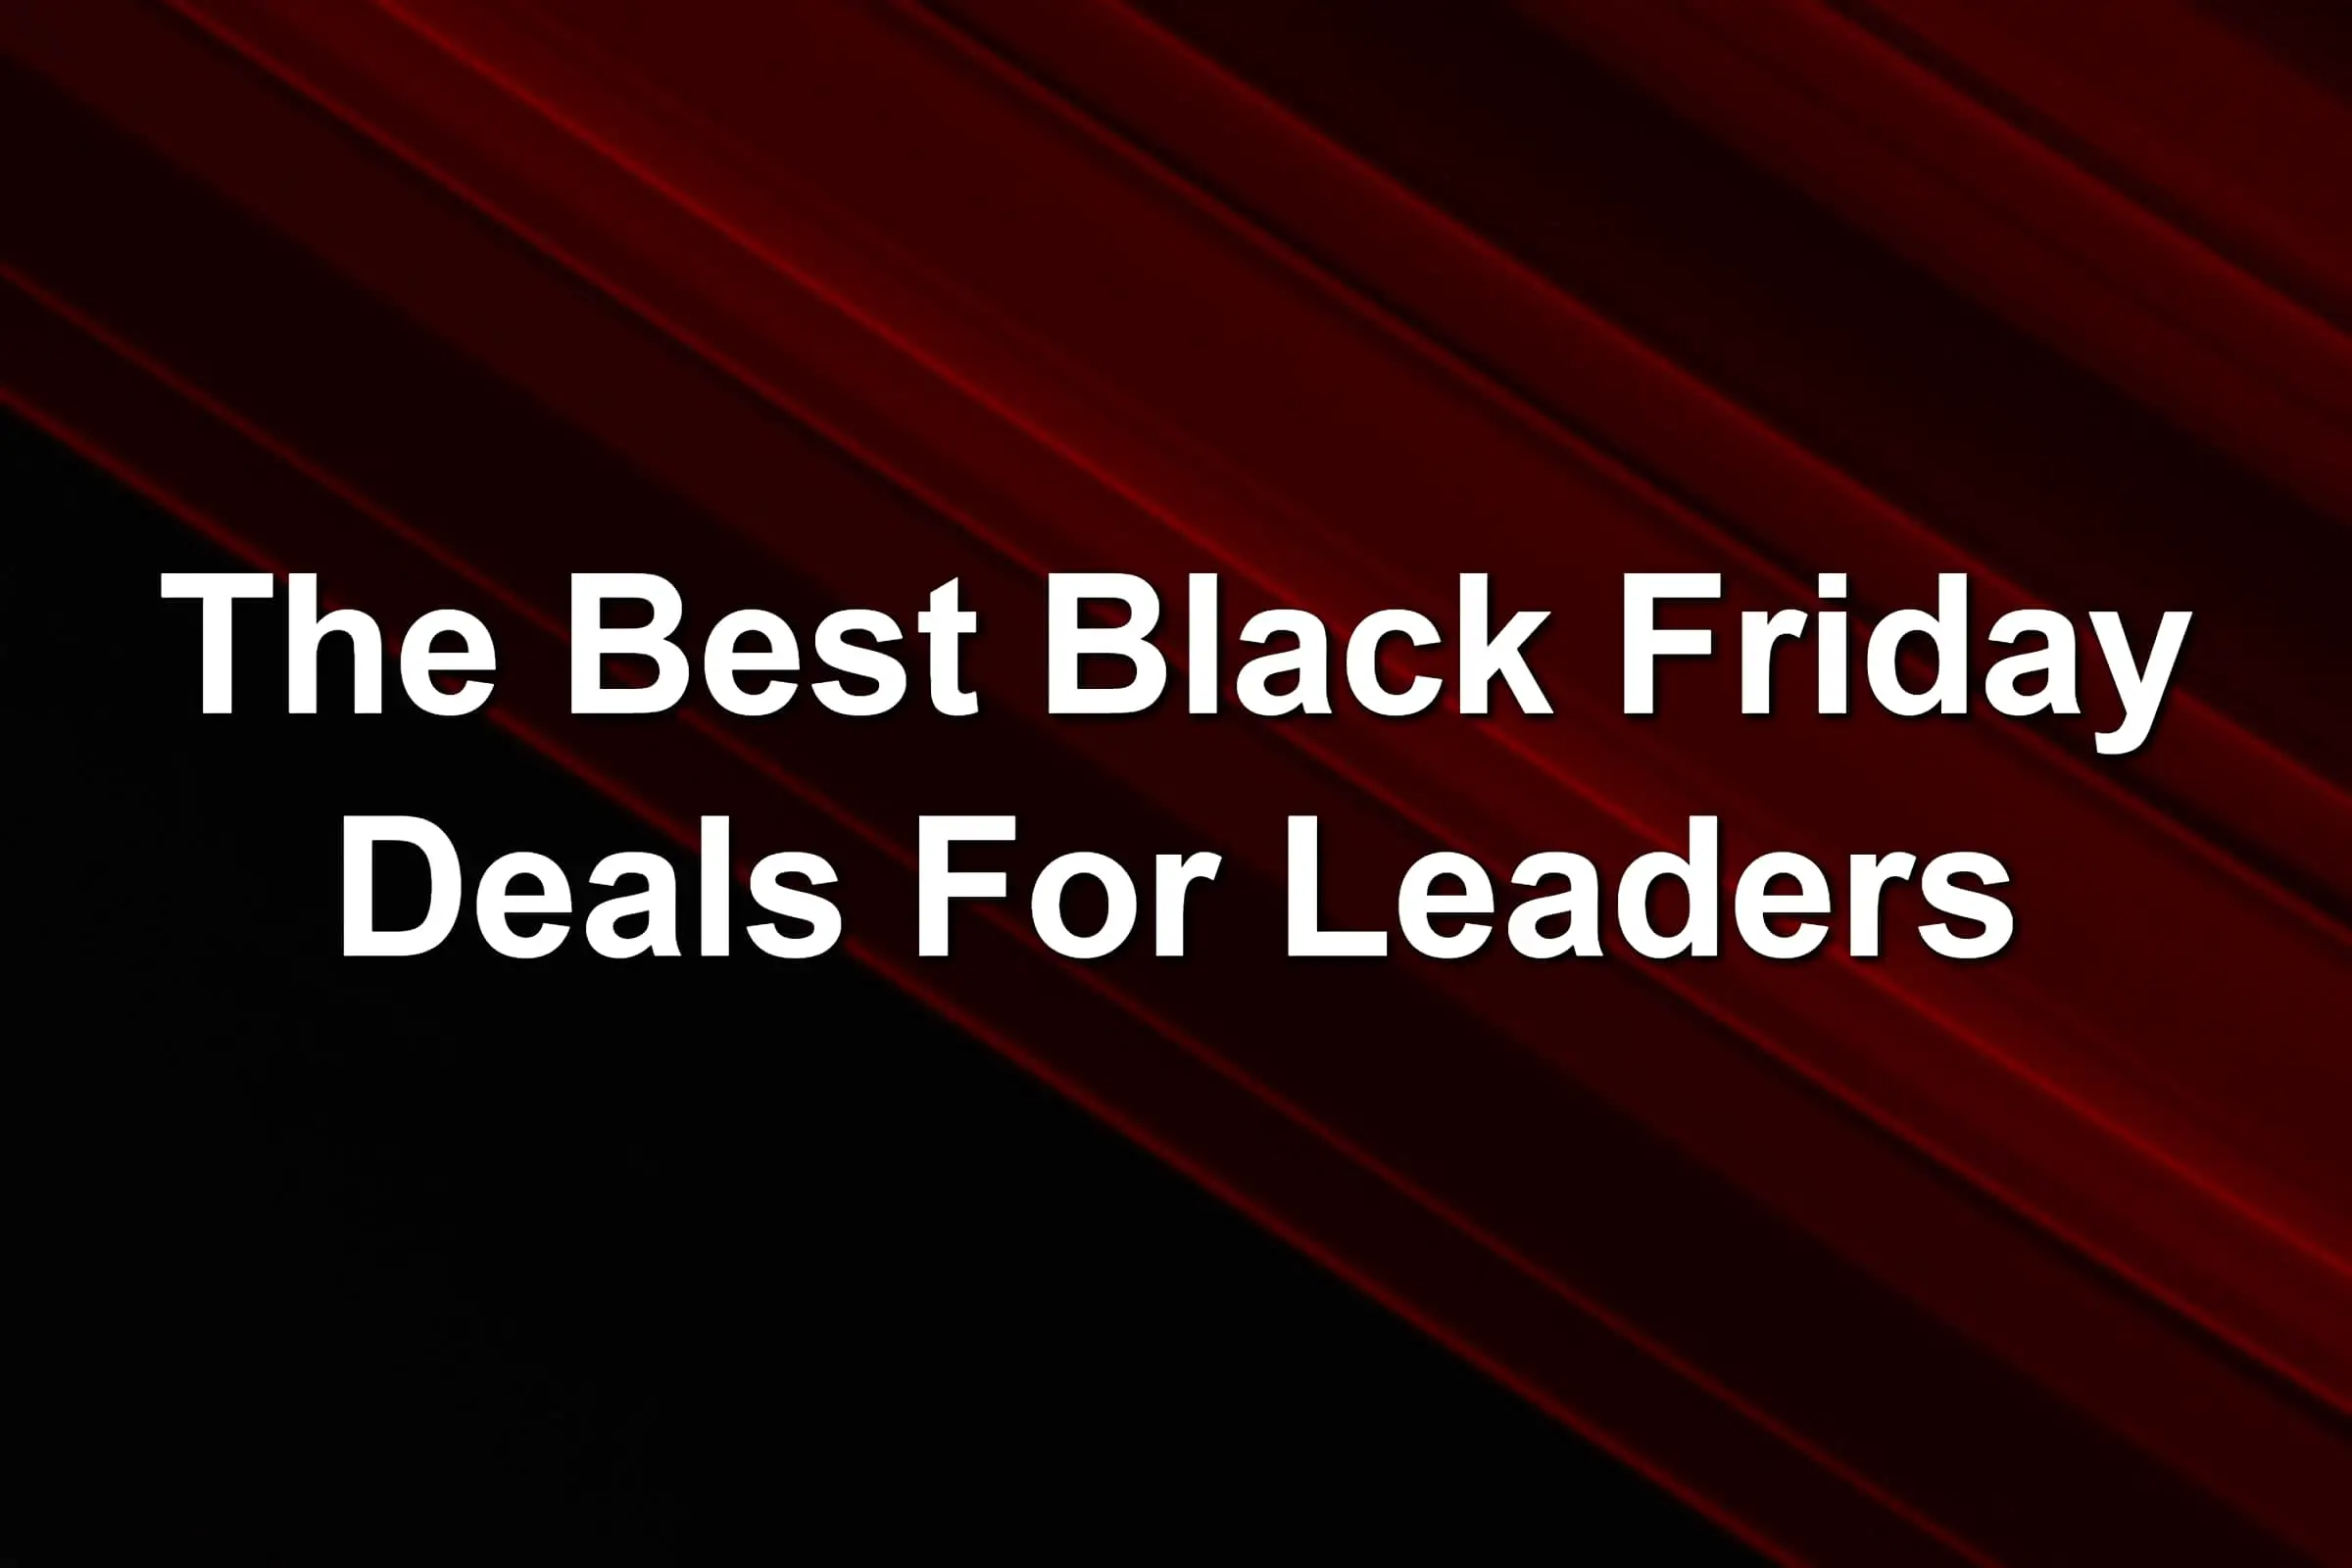 The Best Black Friday Deals For Leaders